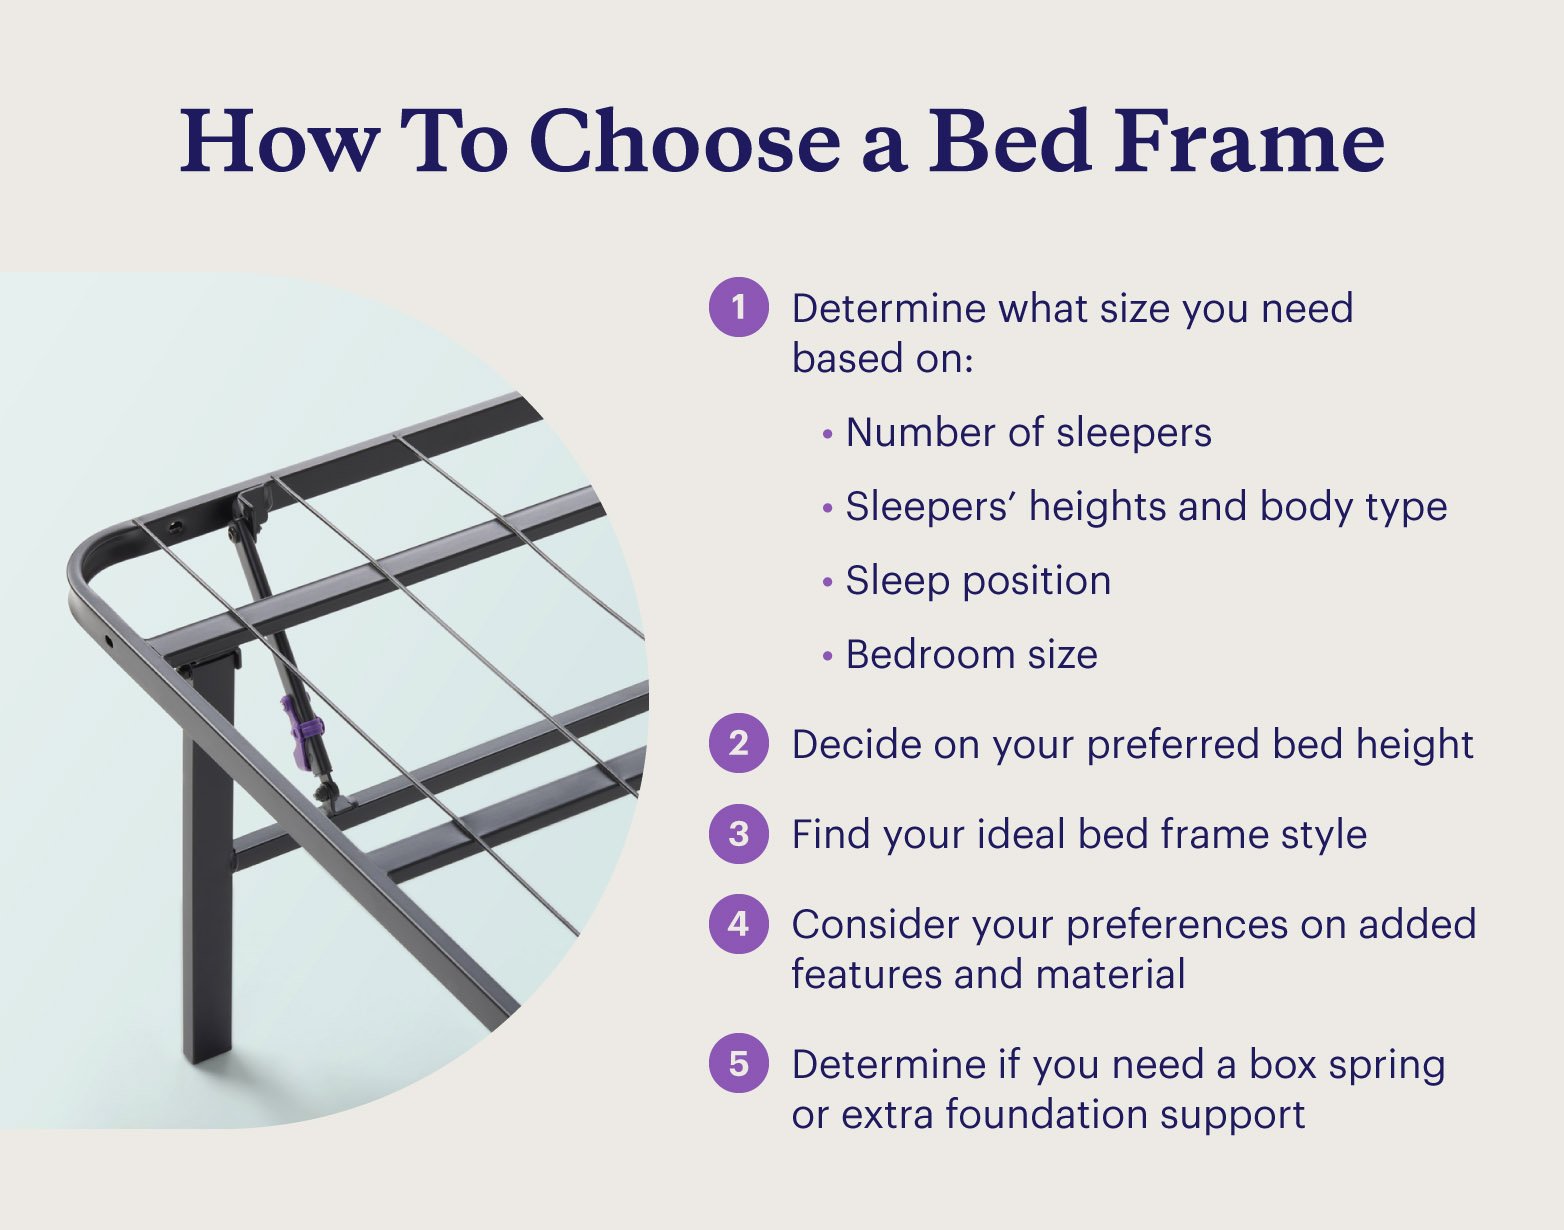 Five steps for choosing a bed frame next to an image of a Purple Platform Bed Frame.